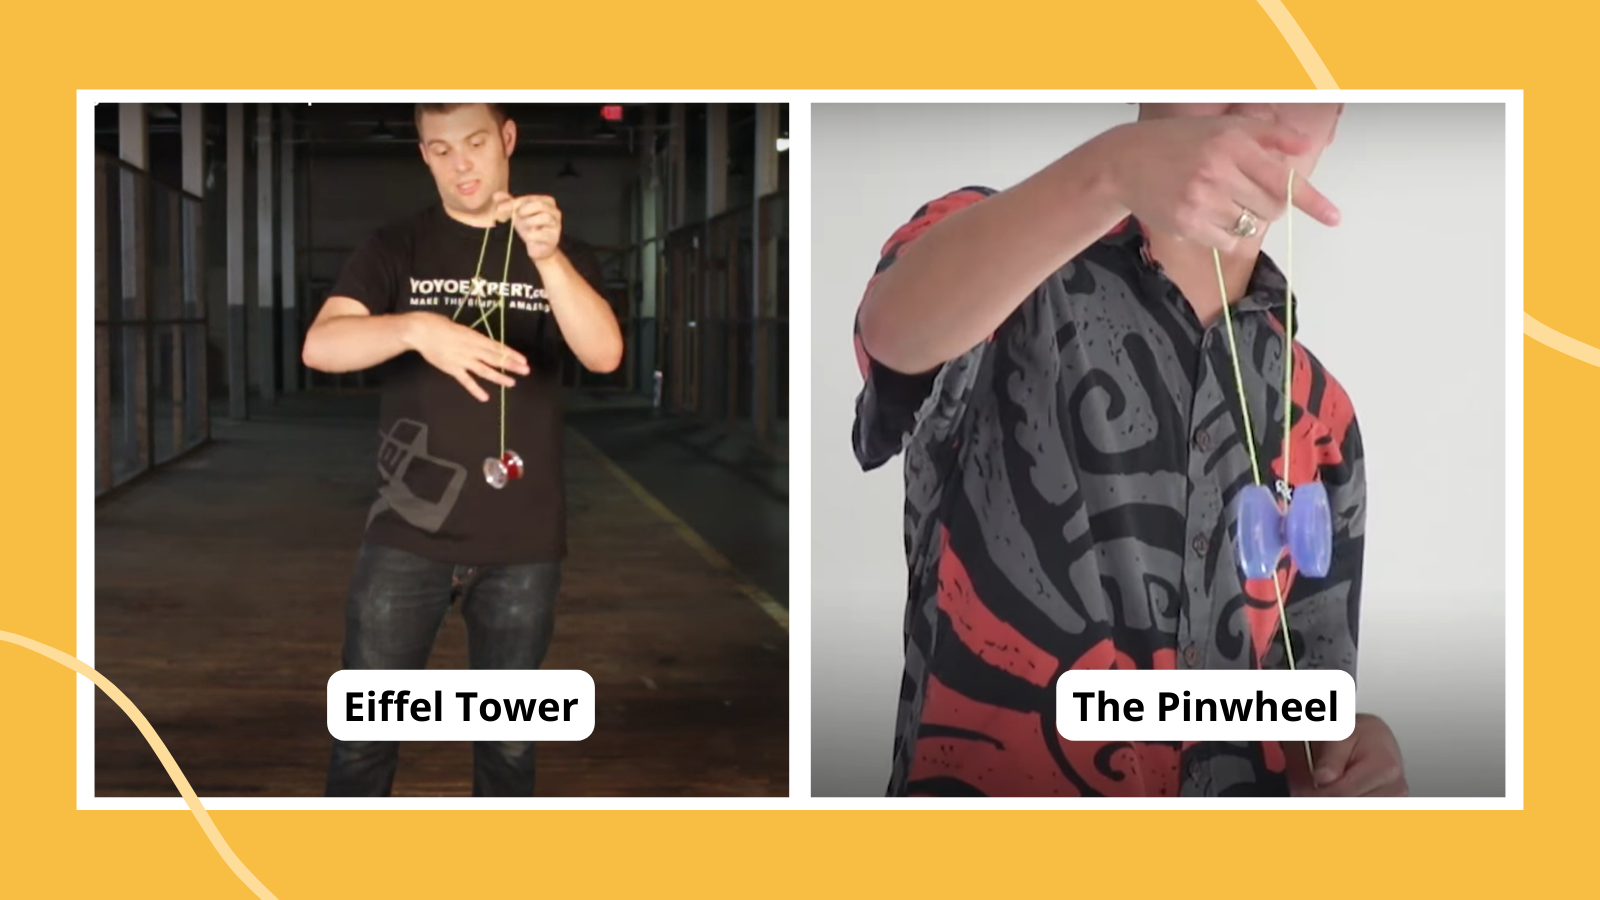 Two young men doing yoyo tricks called Eiffel Tower and the Pinwheel.